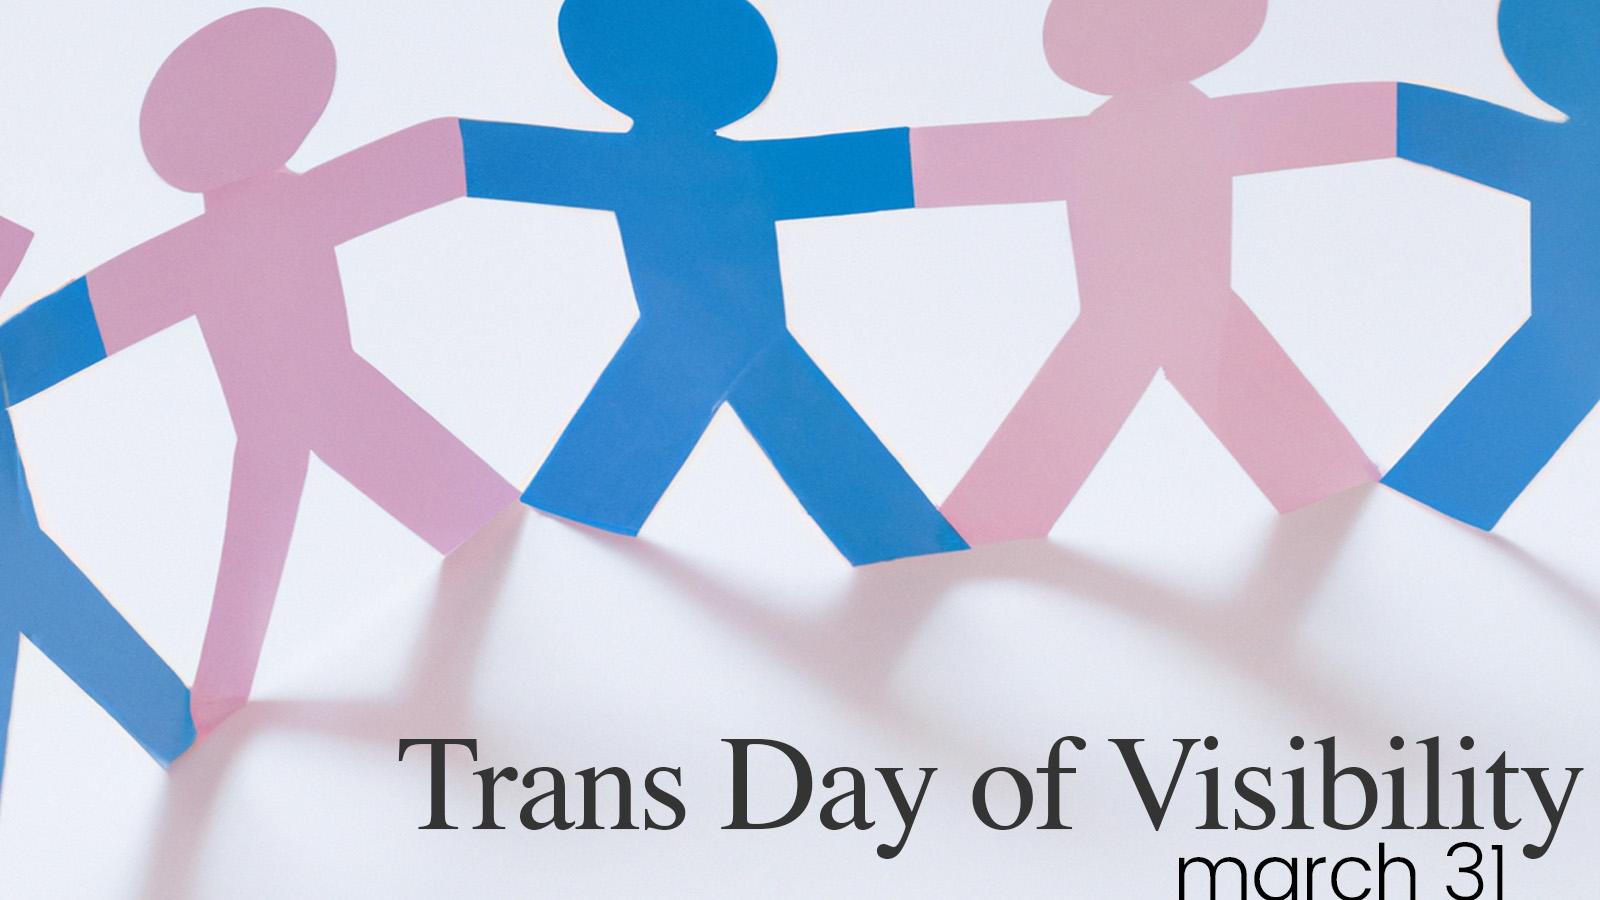 Trans Day of Visibility March 31 with pink and blue paper doll cutouts